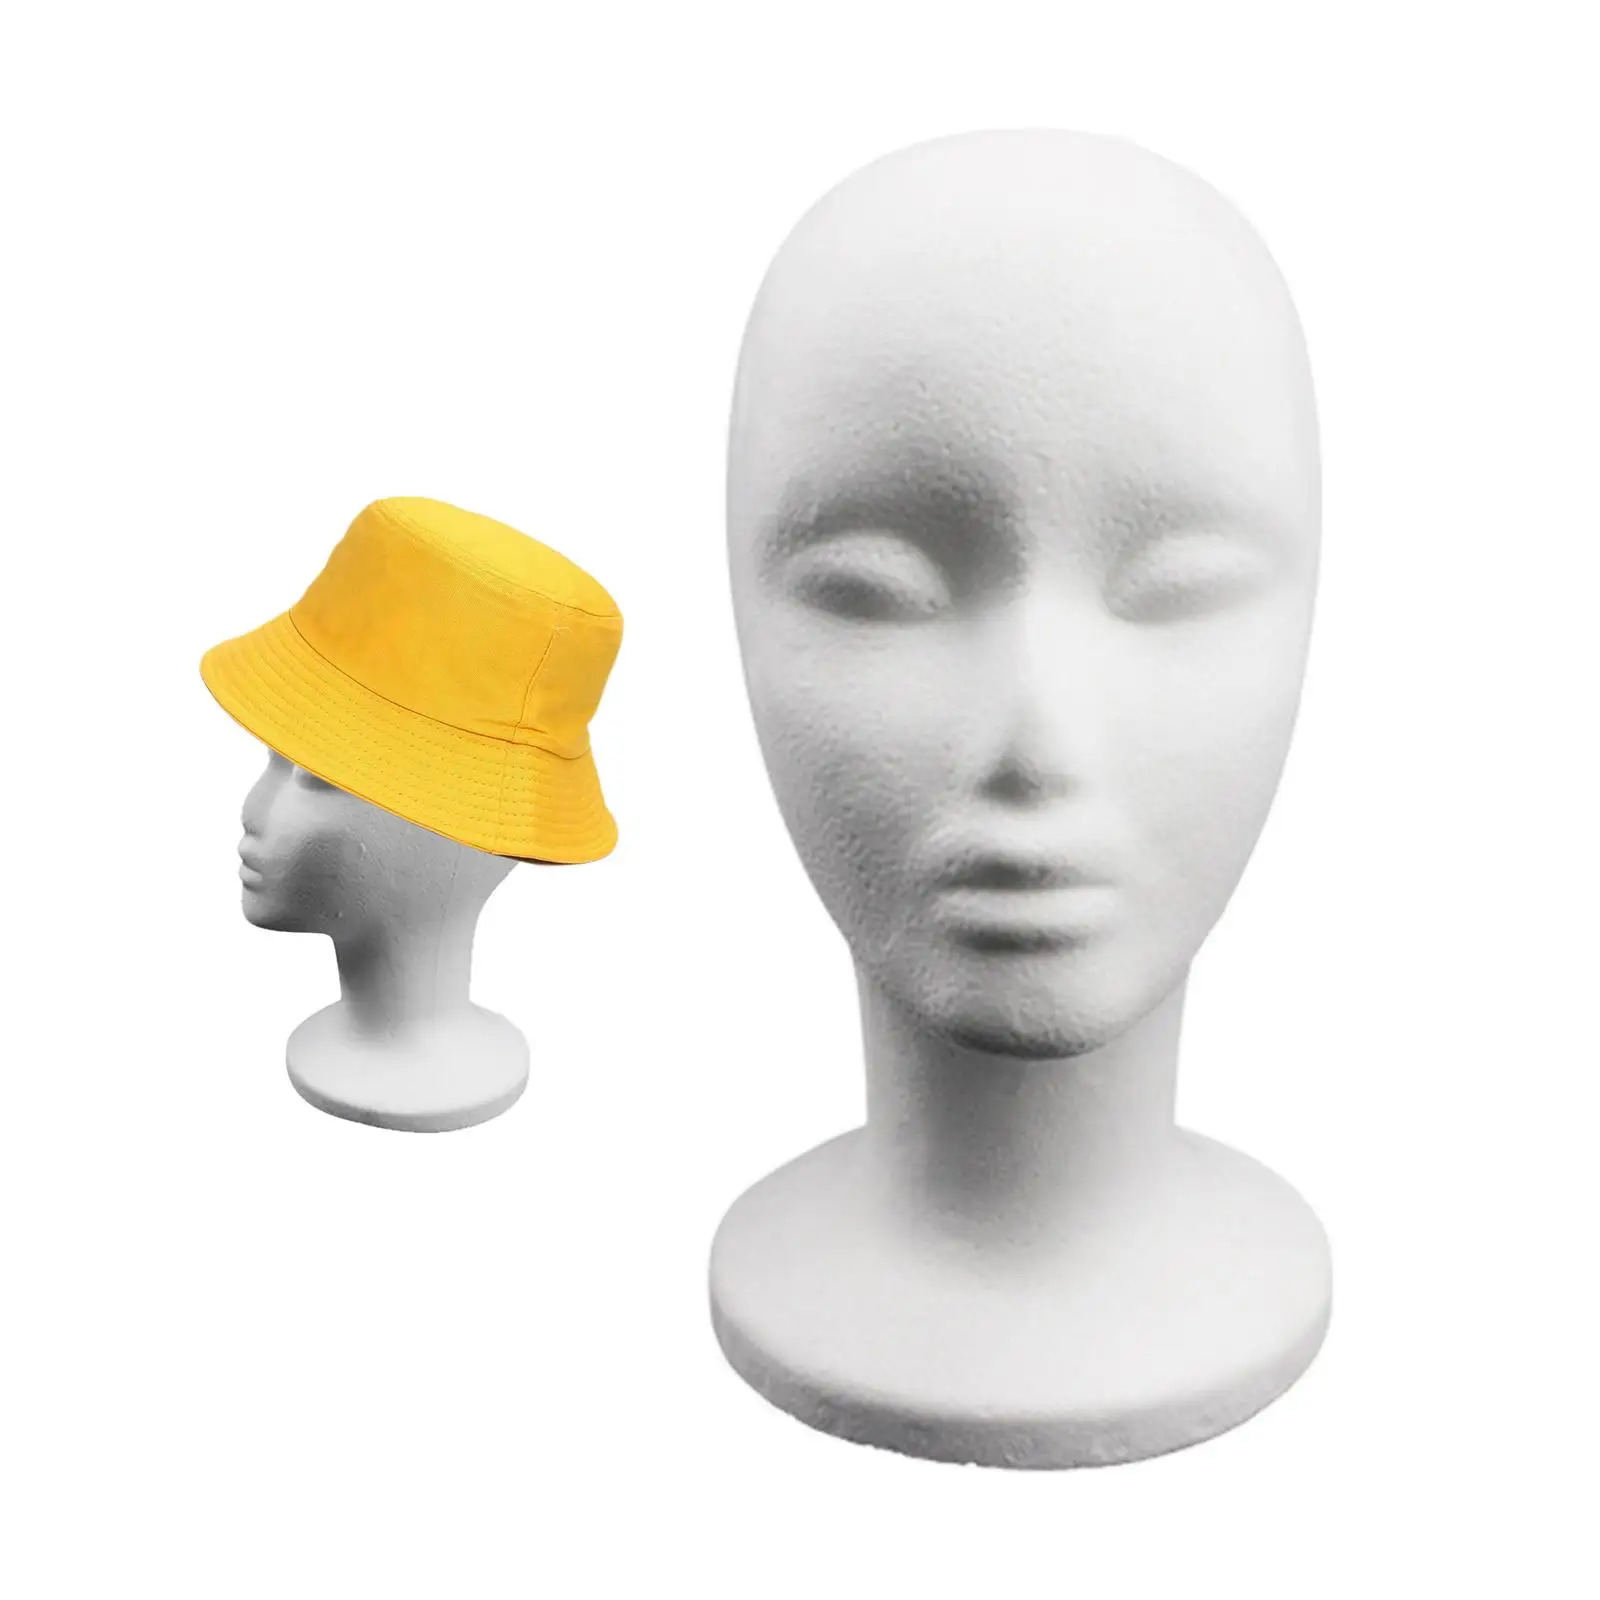 

2Pc Mannequin Head Display Stand Model Display for Hats Glasses